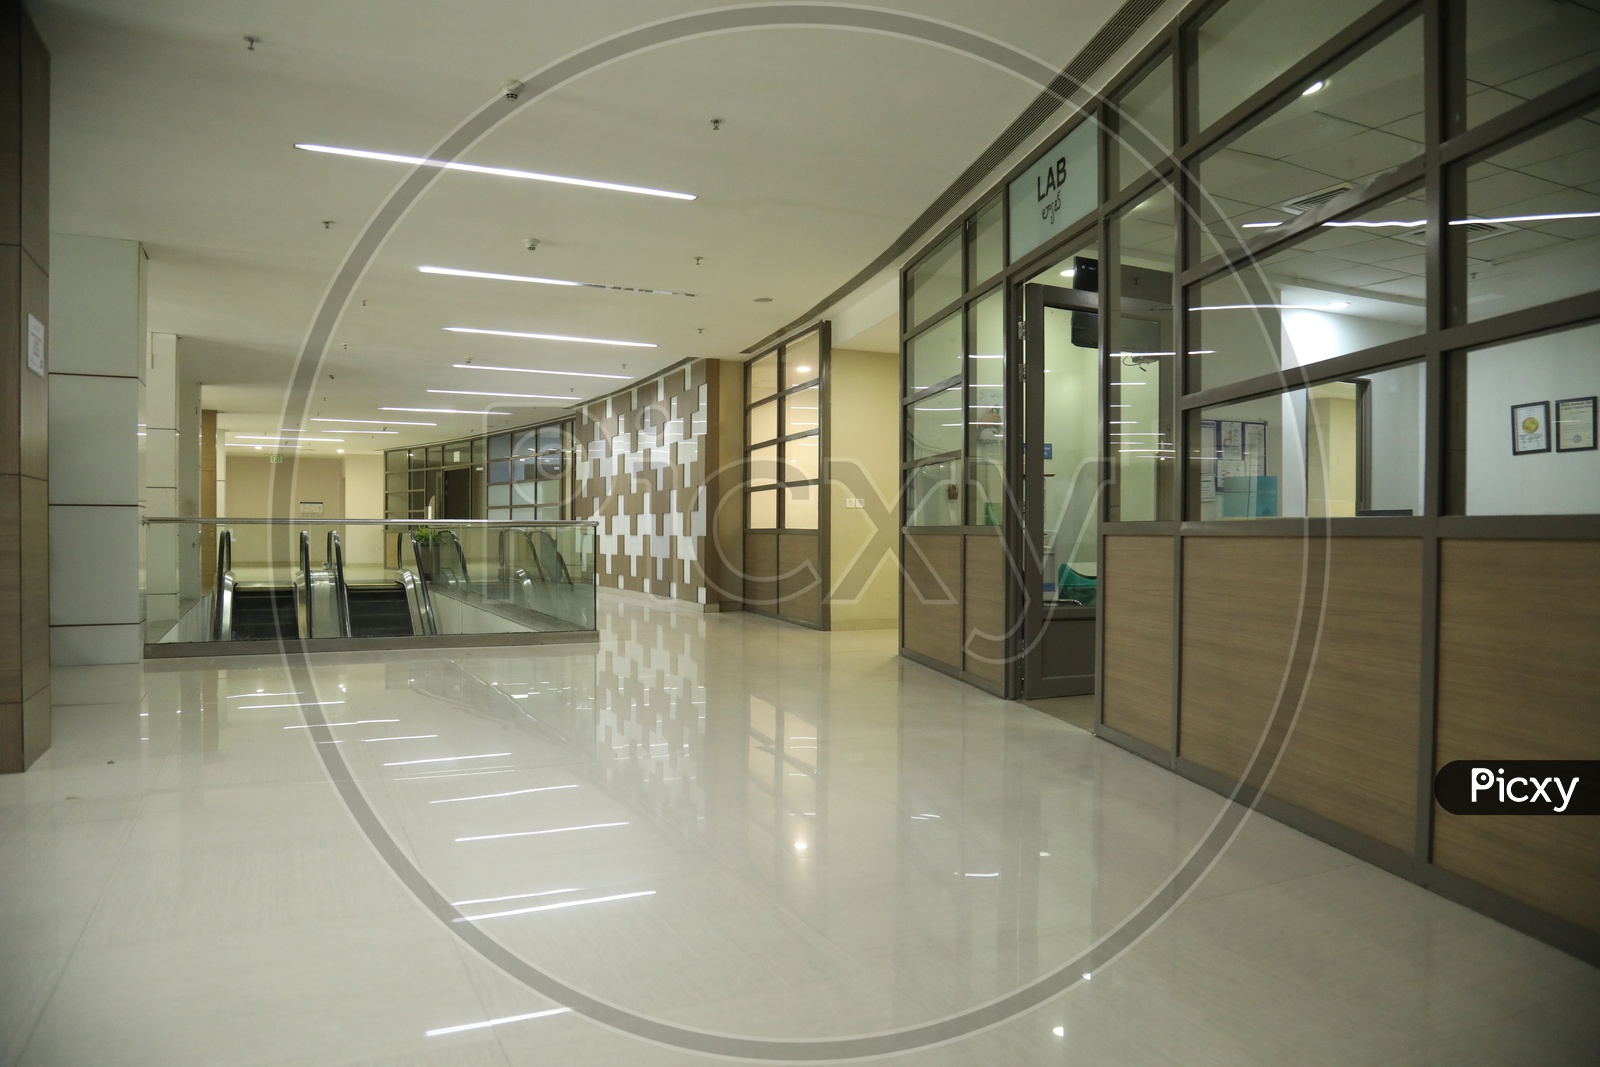 Architecture of a Hospital Corridor And Interiors With Glass